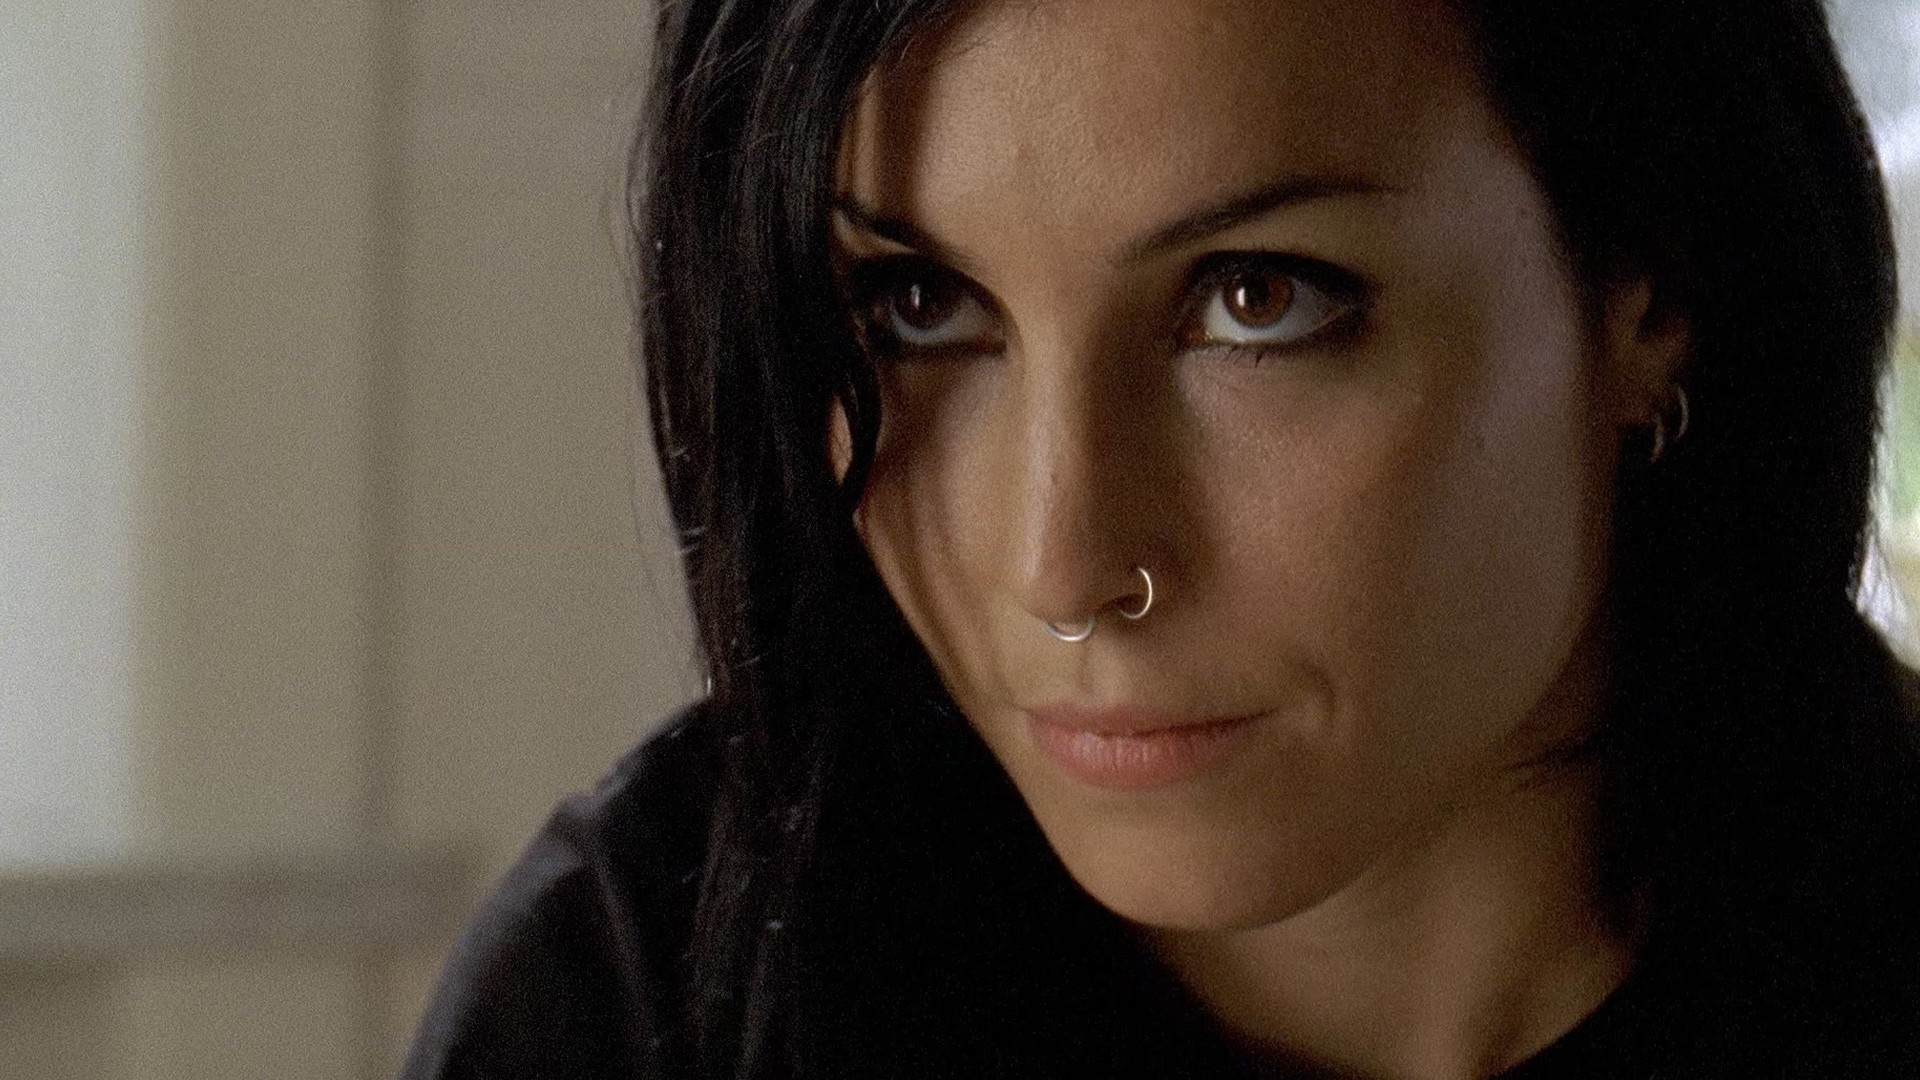 Noomi Rapace #10